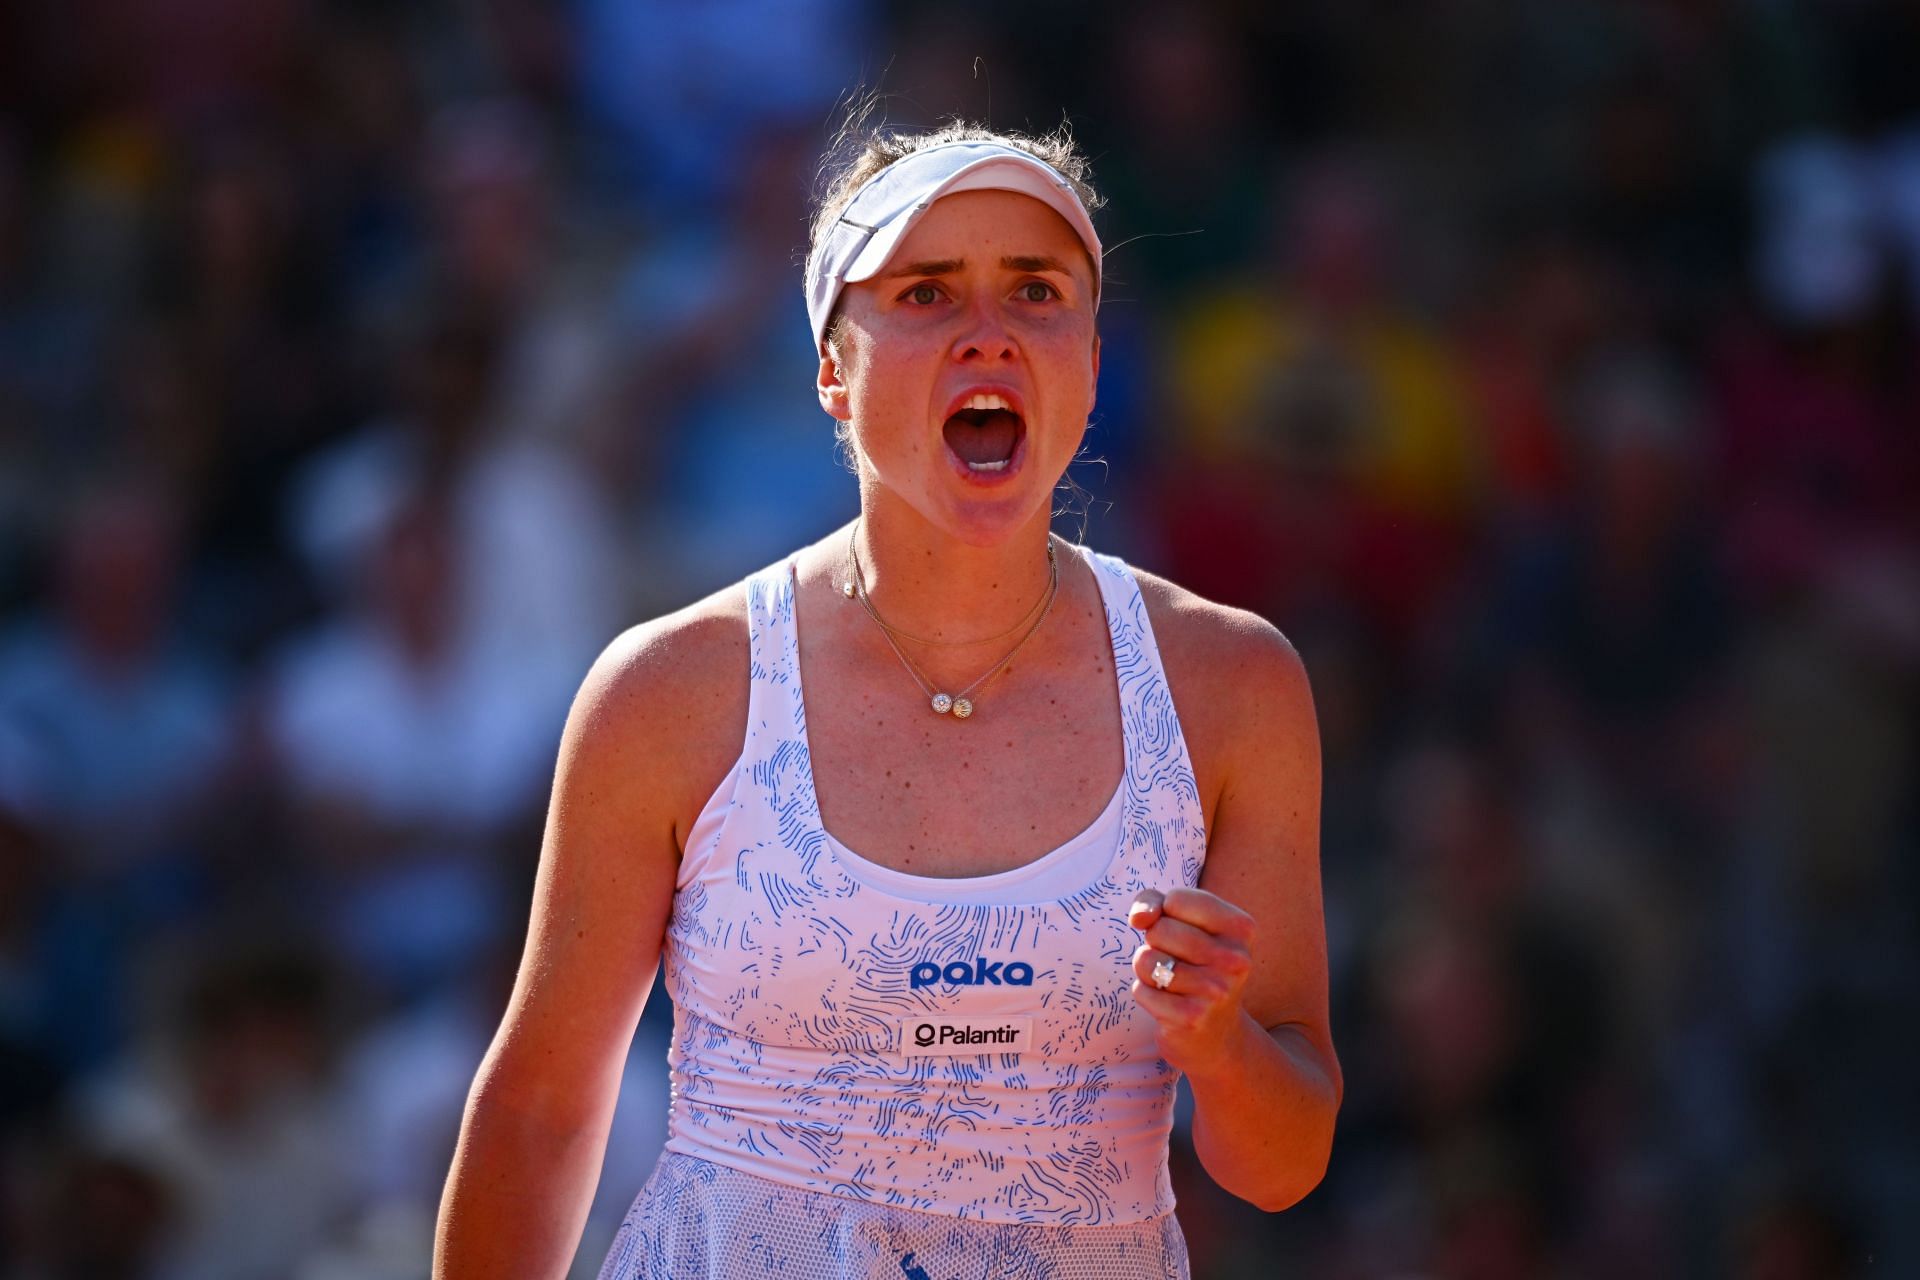 Elina Svitolina said she does not mind the crowd booing her